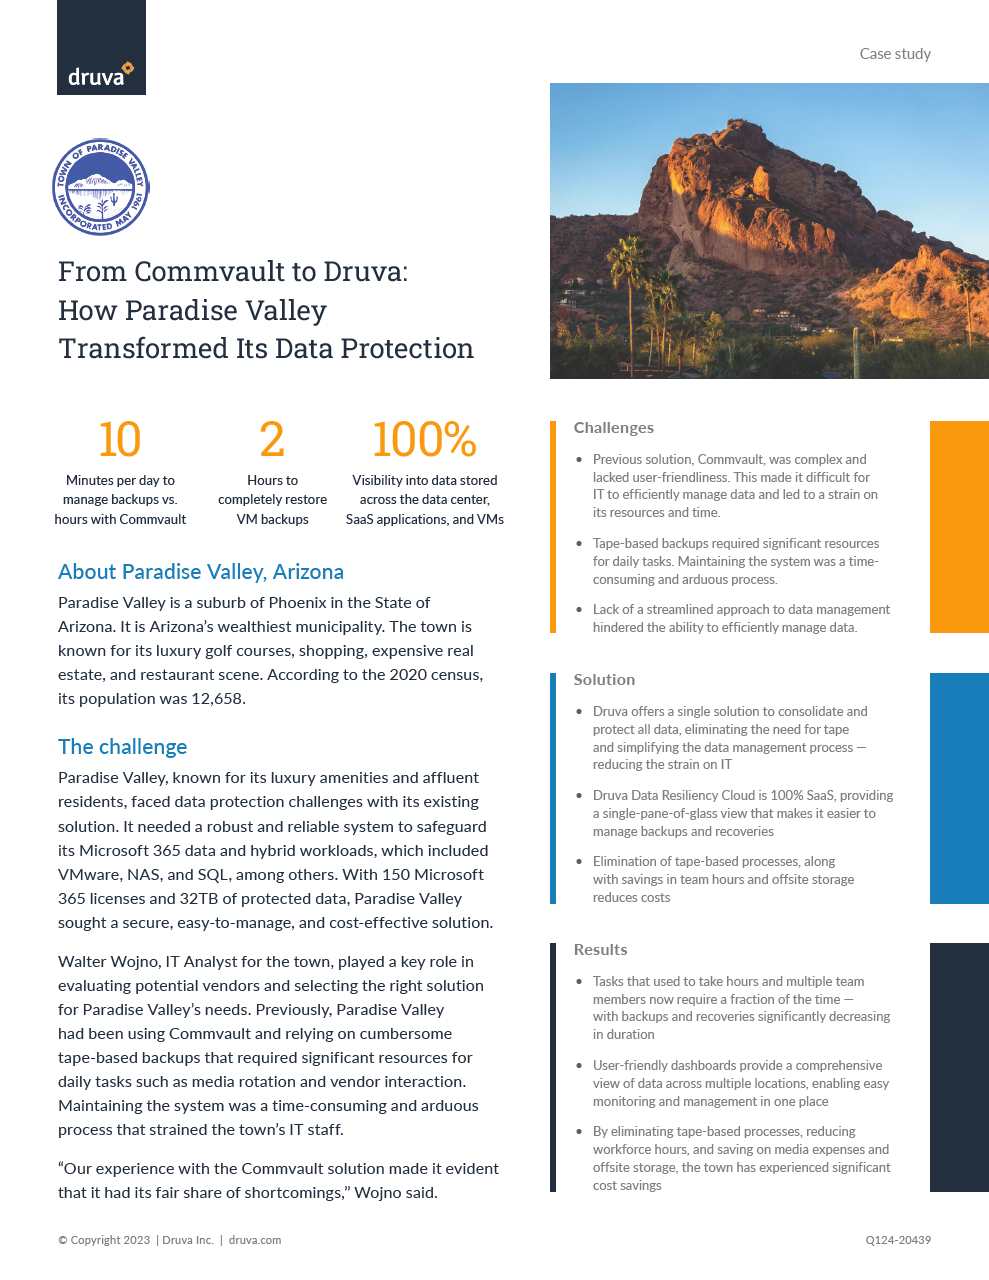 From Commvault to Druva: How Paradise Valley Transformed Its Data Protection